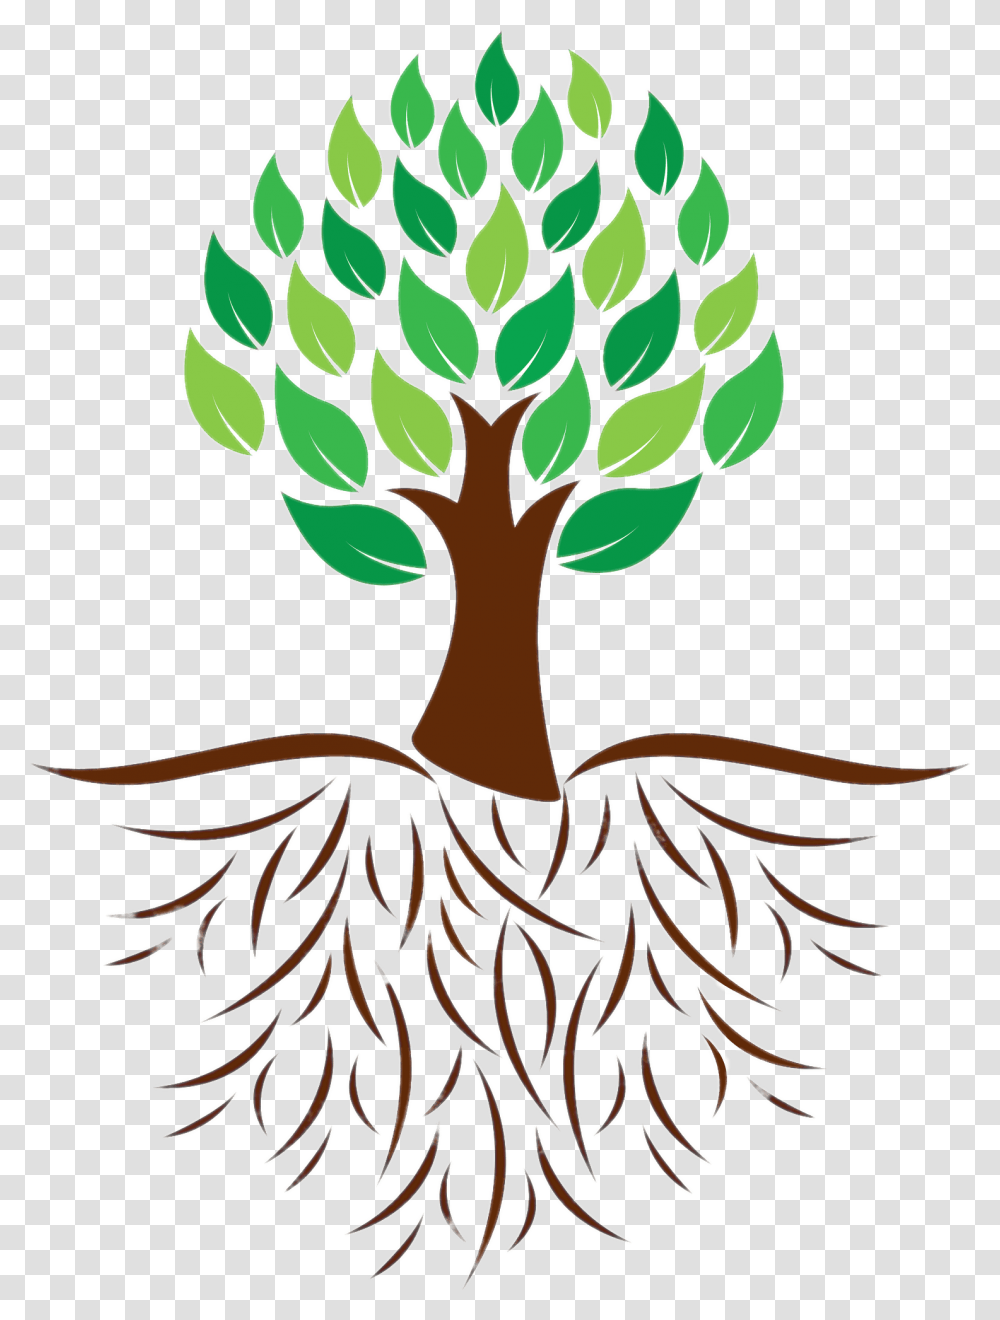 Tree And Roots Colour Illustration Tree With Roots Icon, Plant, Art, Graphics, Palm Tree Transparent Png